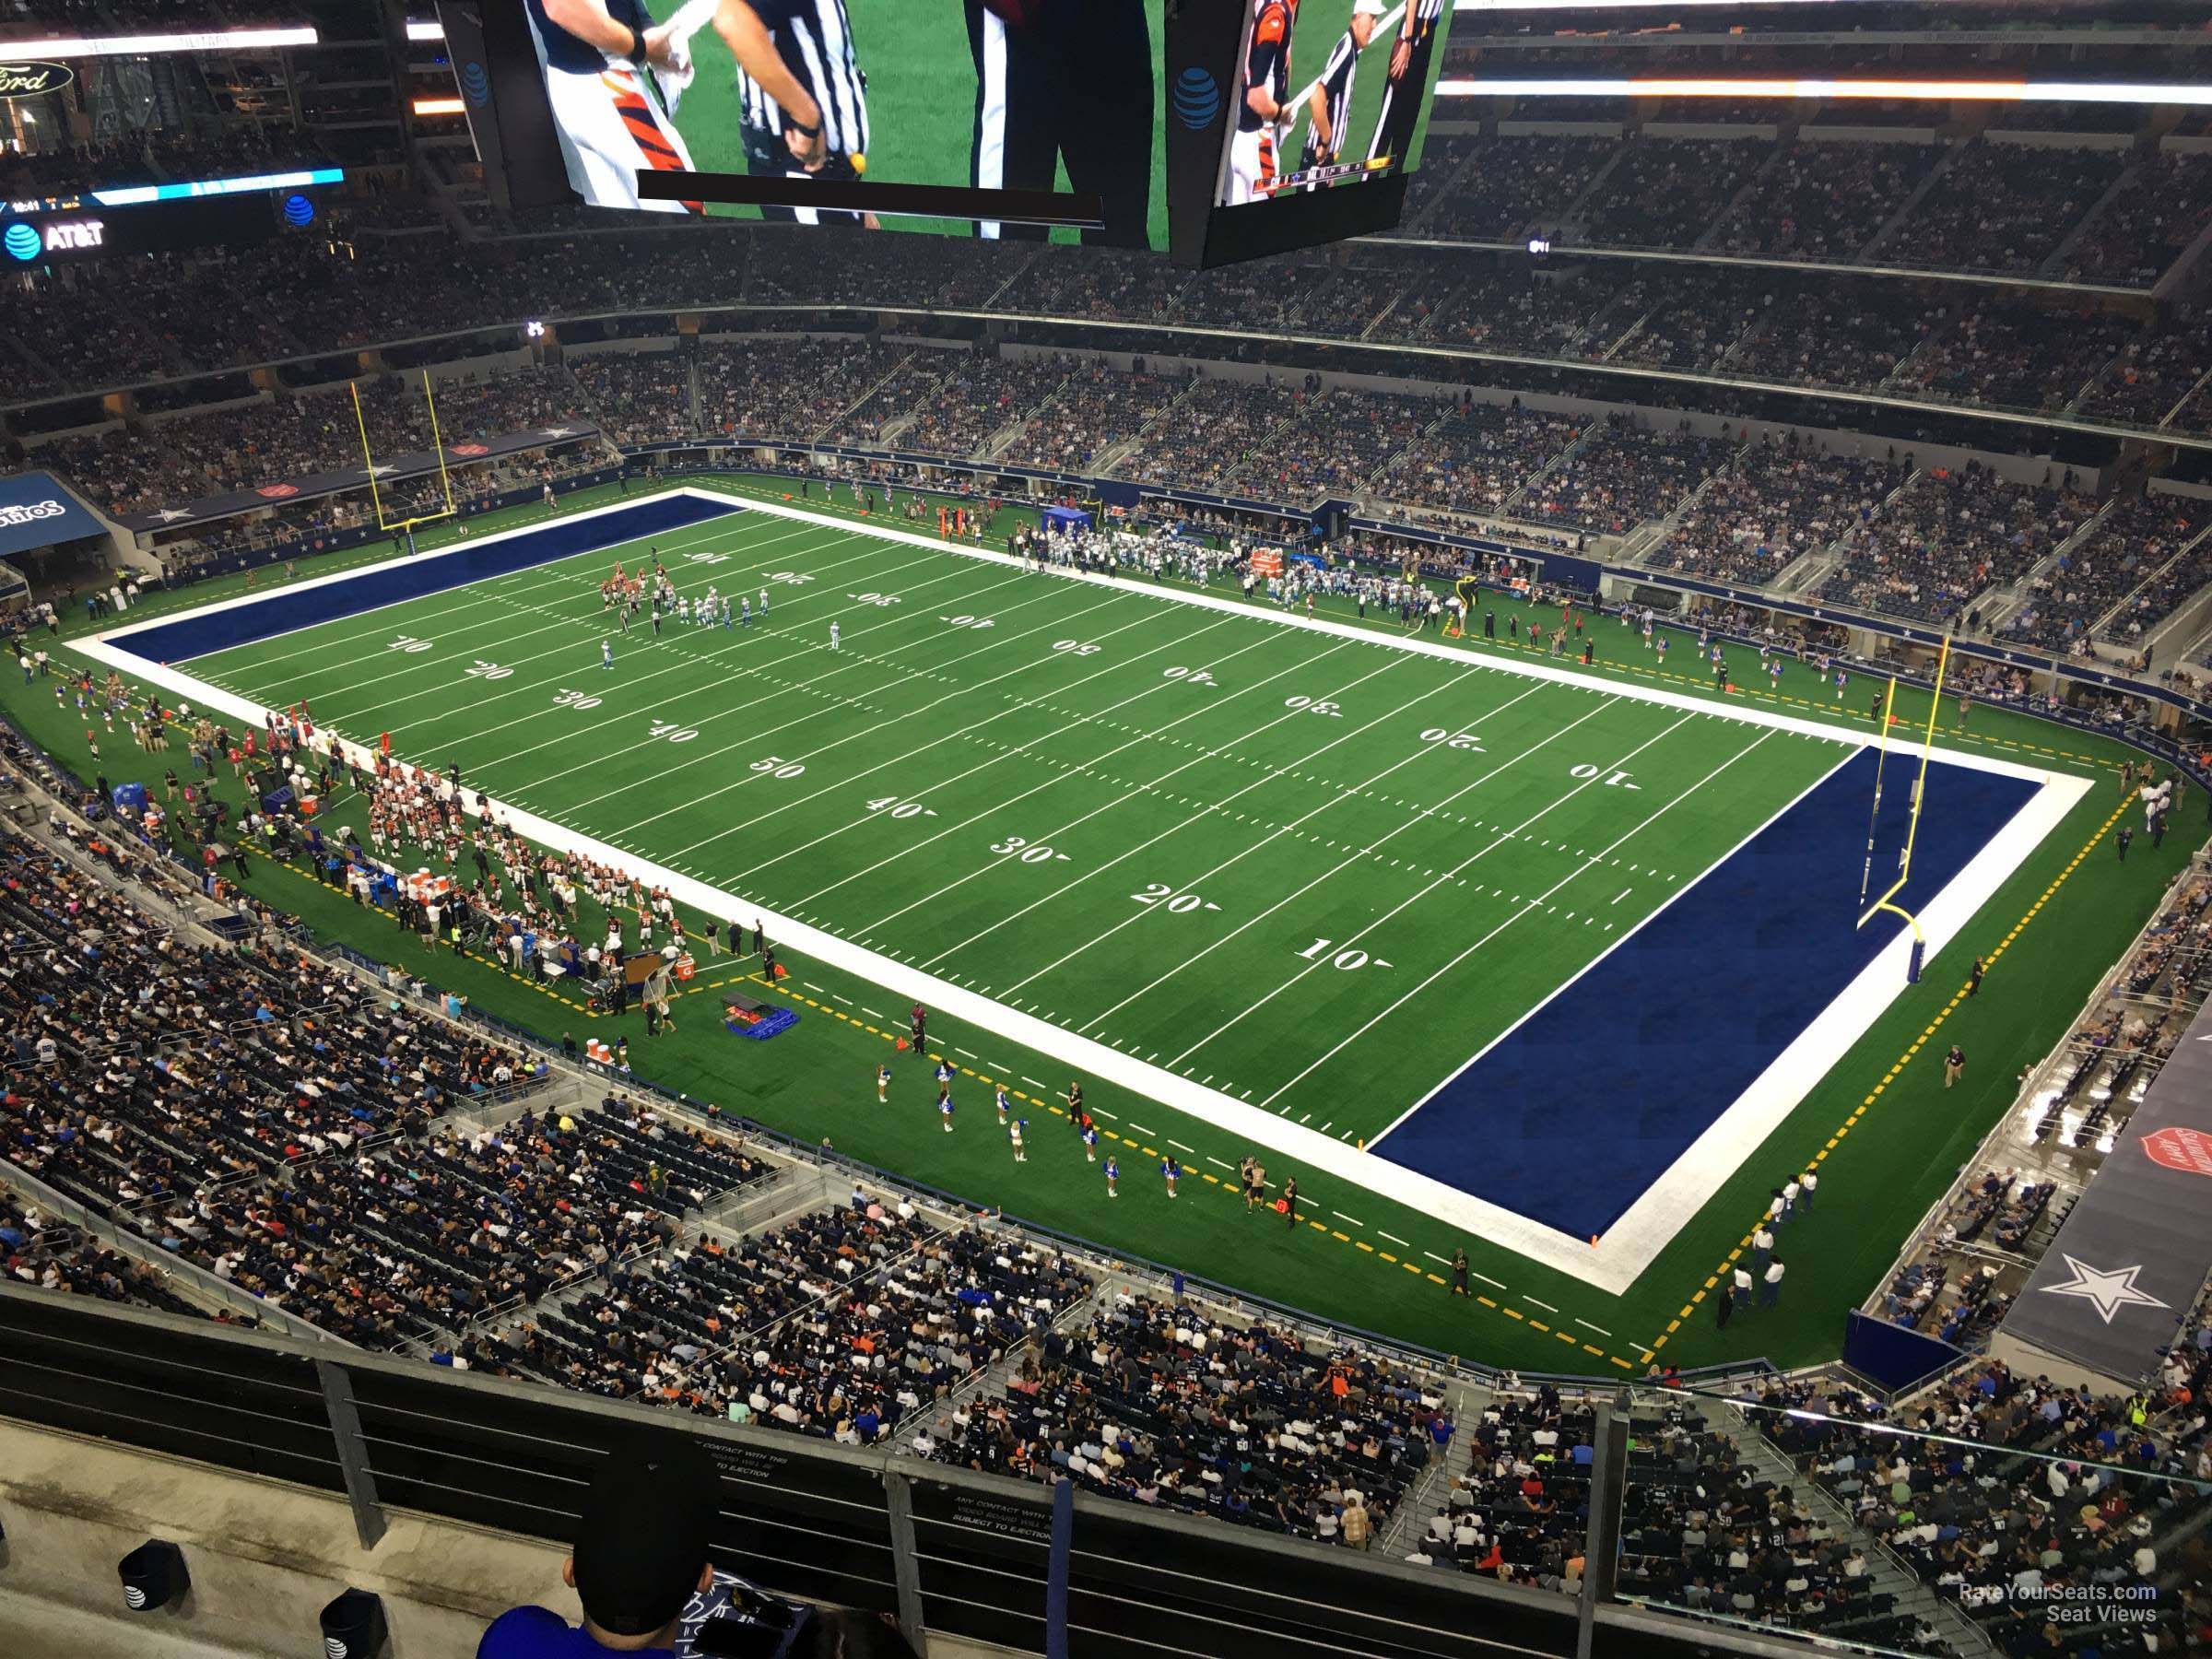 section 437, row 4 seat view  for football - at&t stadium (cowboys stadium)